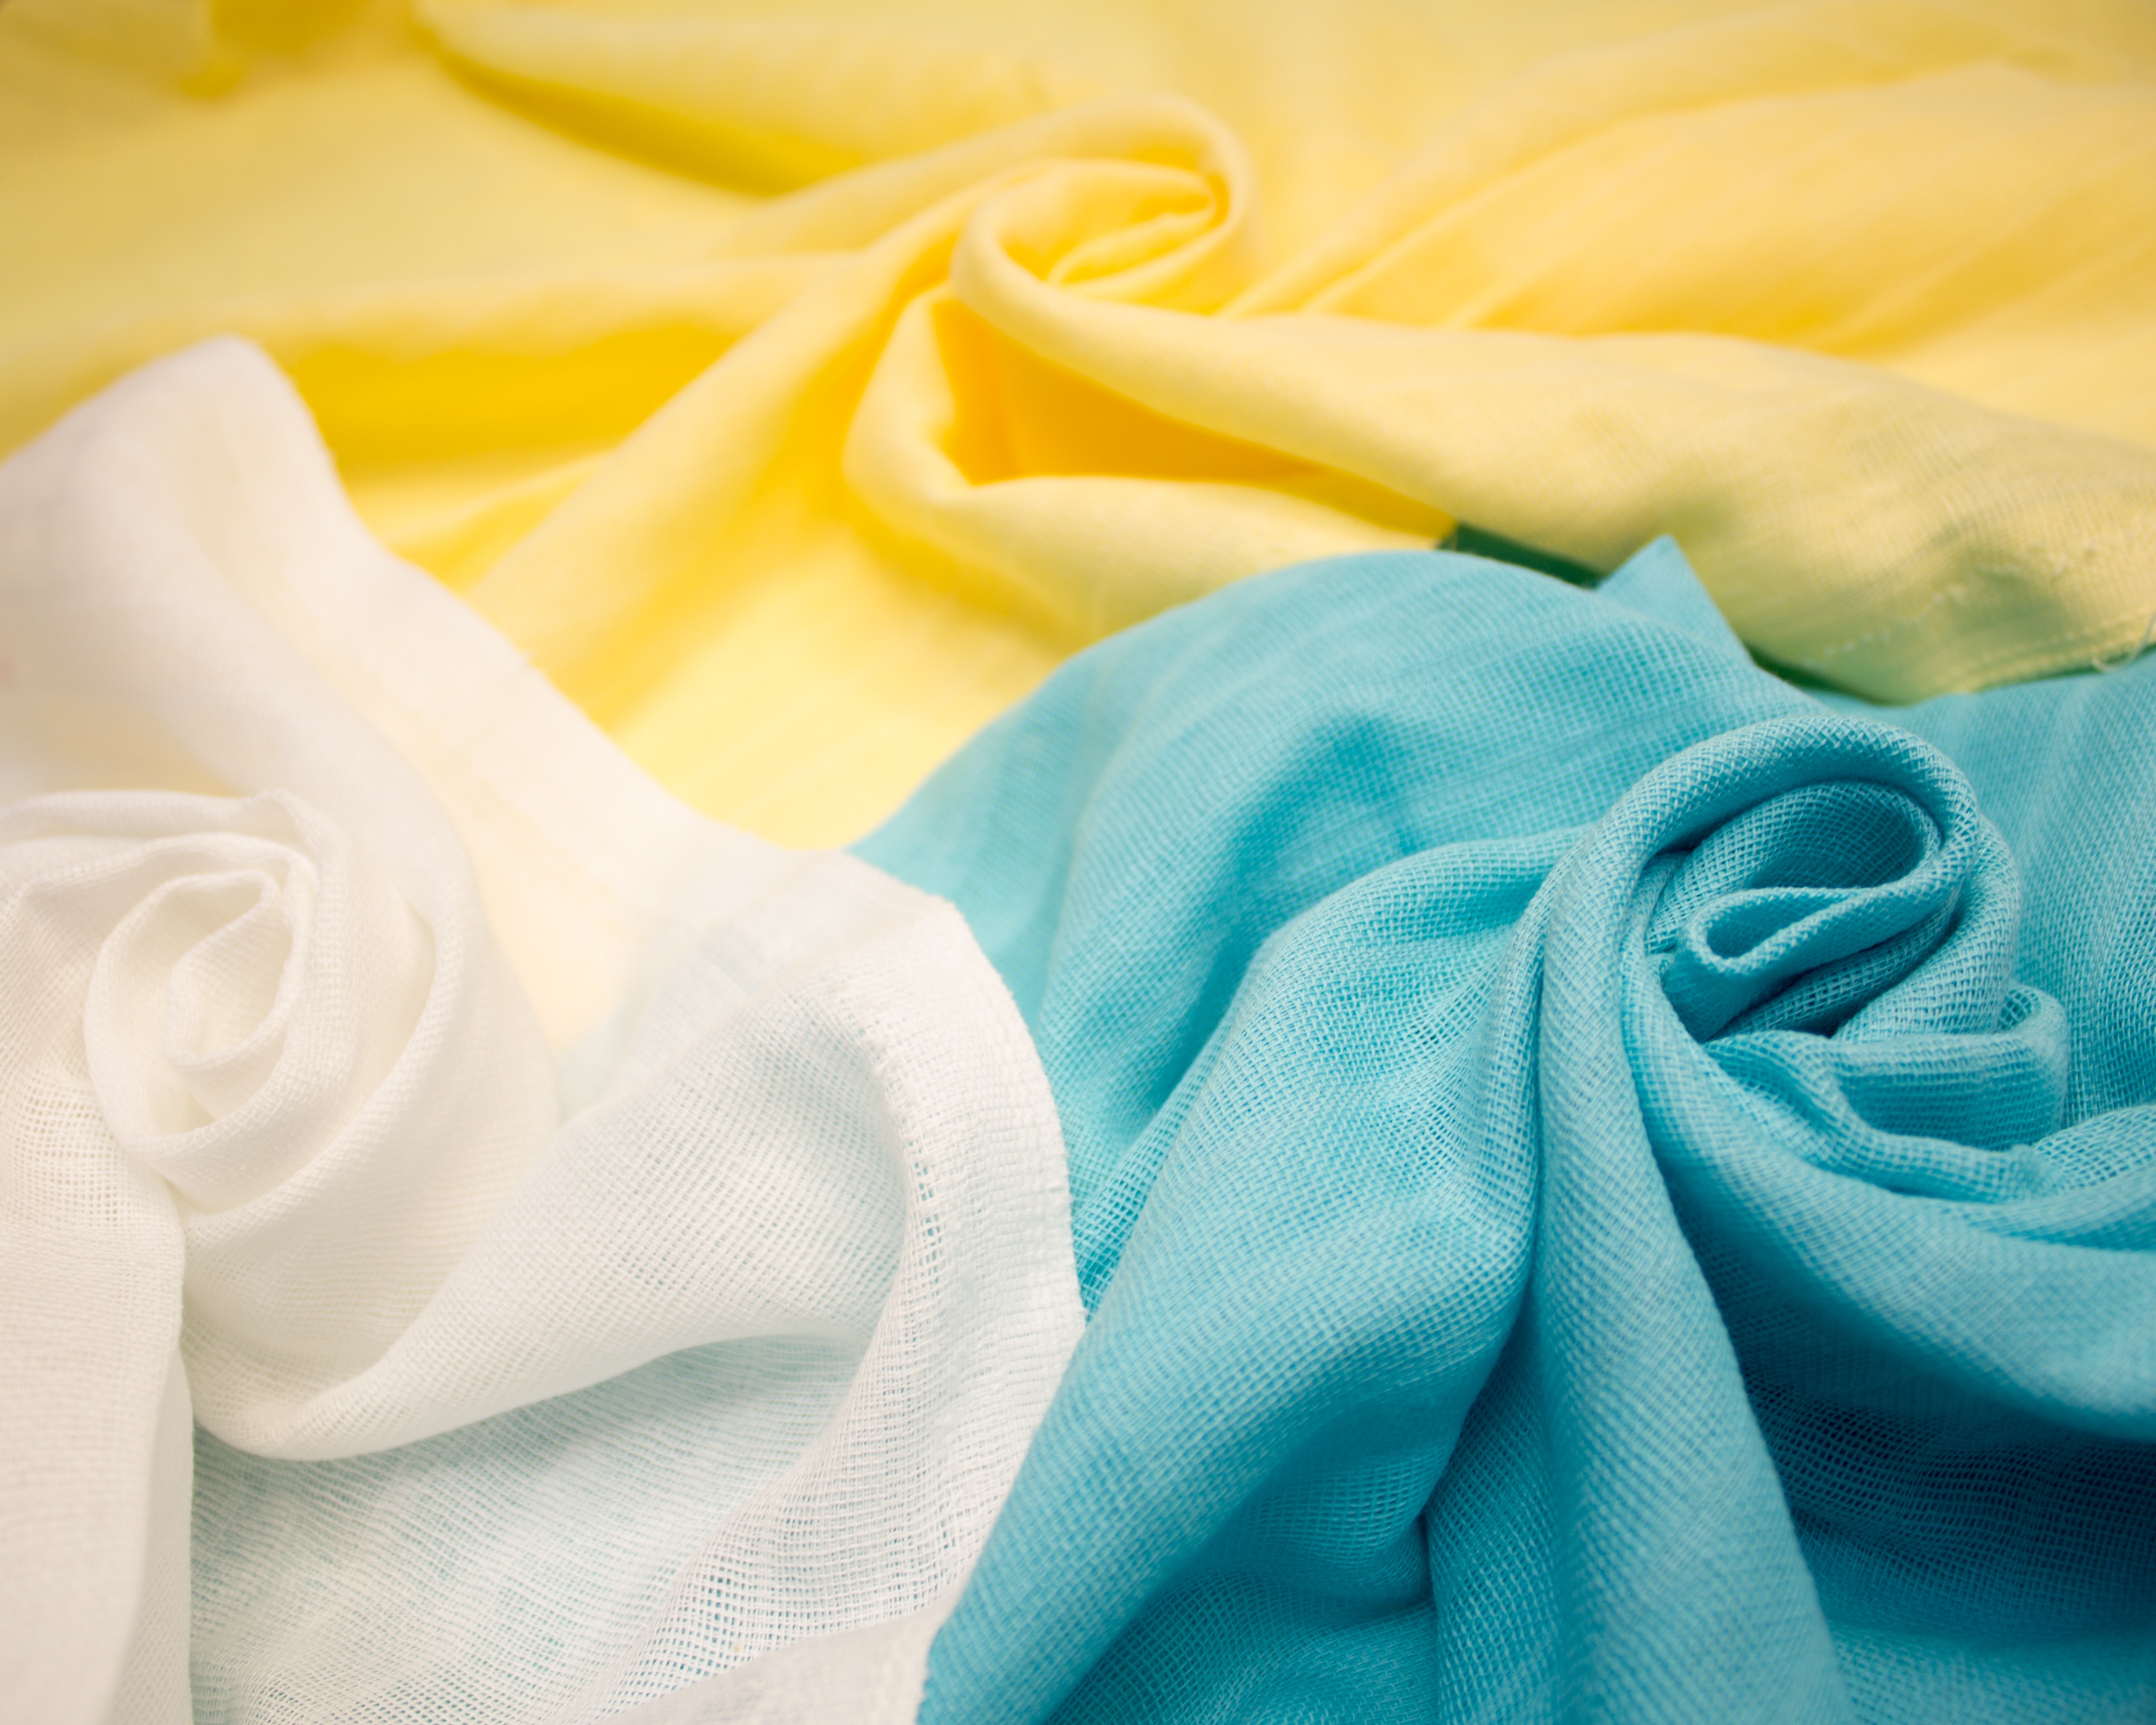 Textile Softeners enhance the softness and durability of fabrics, reduce static cling, add freshness, and make ironing easier.